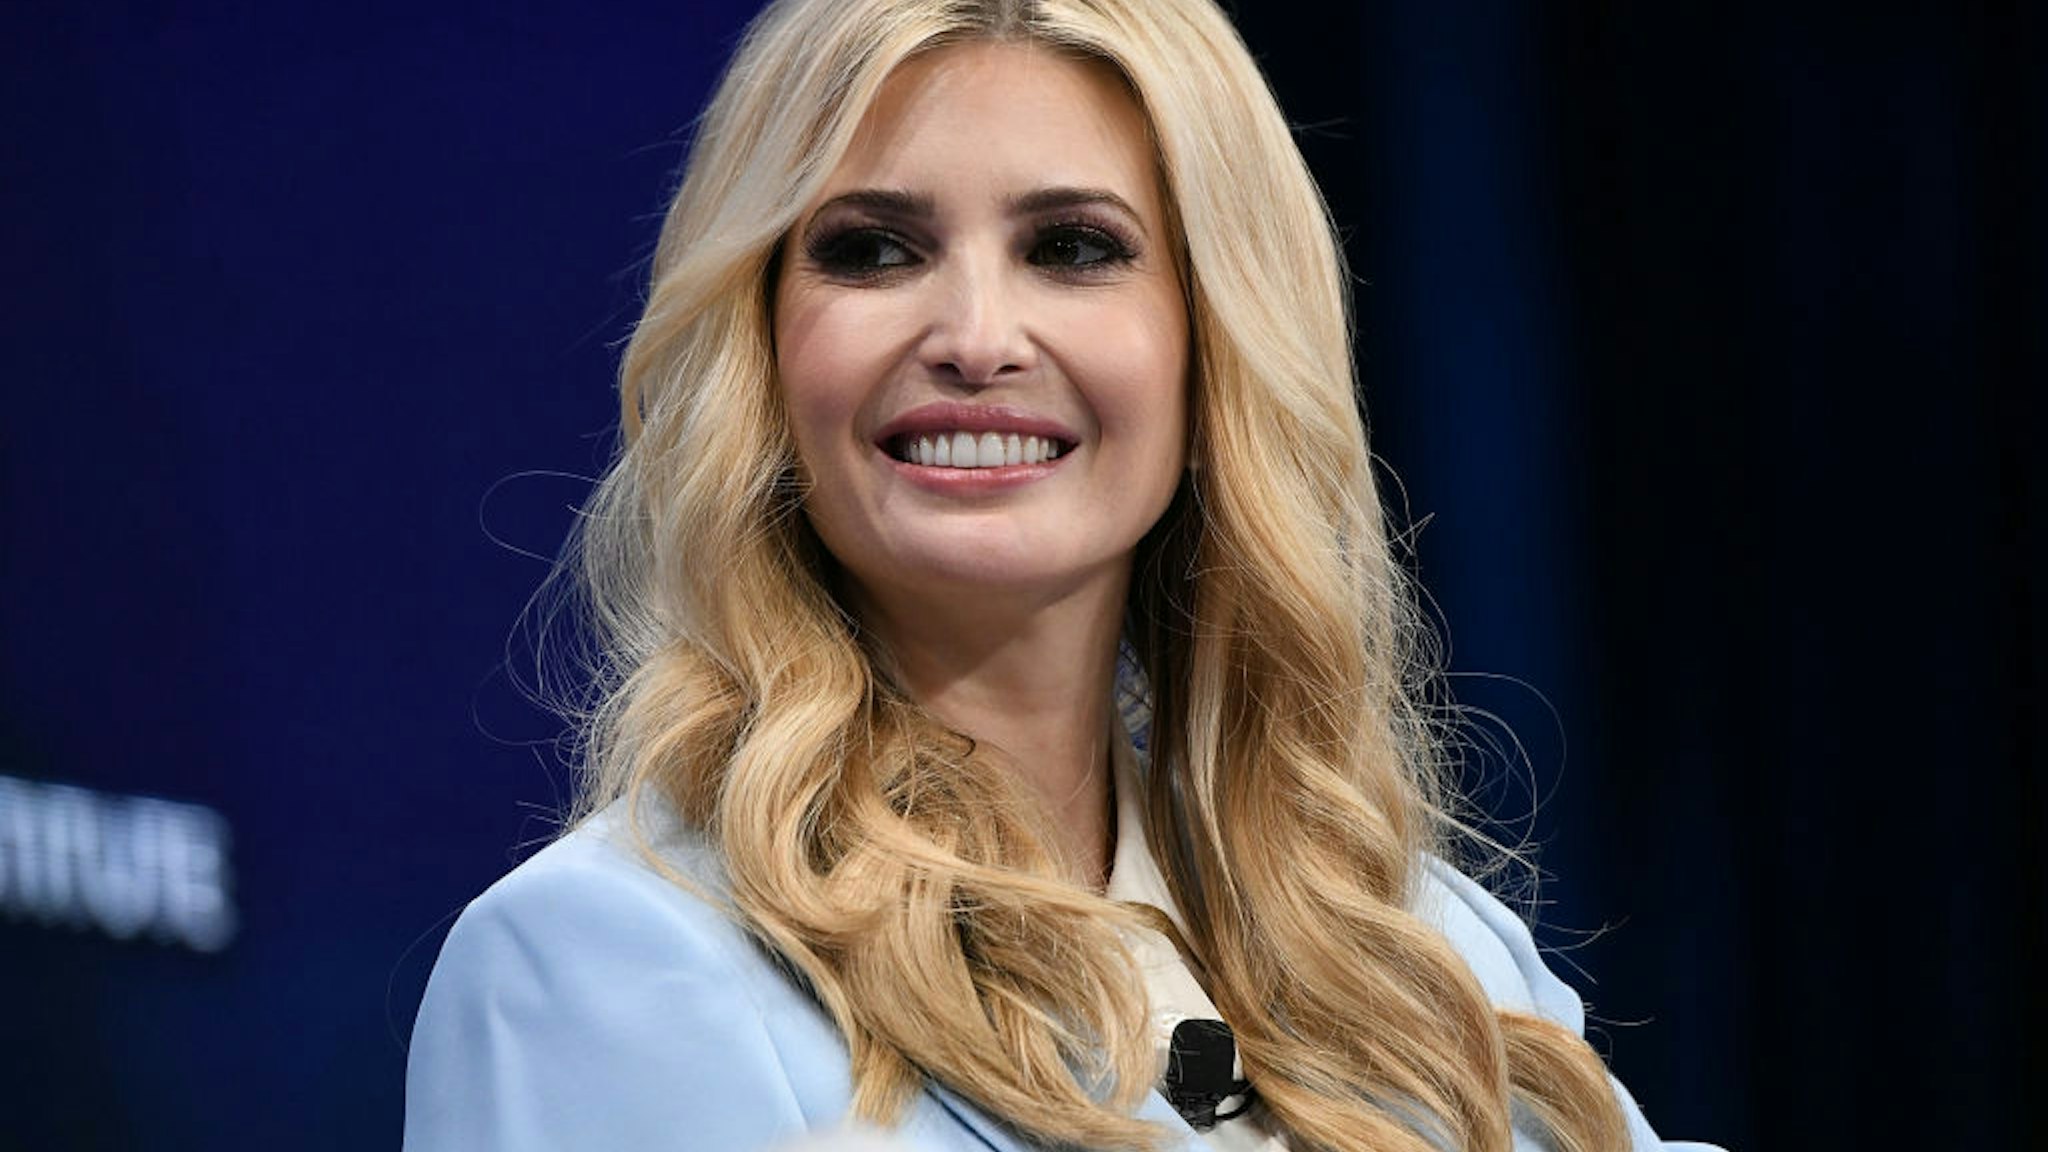 Ivanka Trump, Advisor to the President, The White House, participates in a panel discussion during the annual Milken Institute Global Conference at The Beverly Hilton Hotel on April 28, 2019 in Beverly Hills, California.